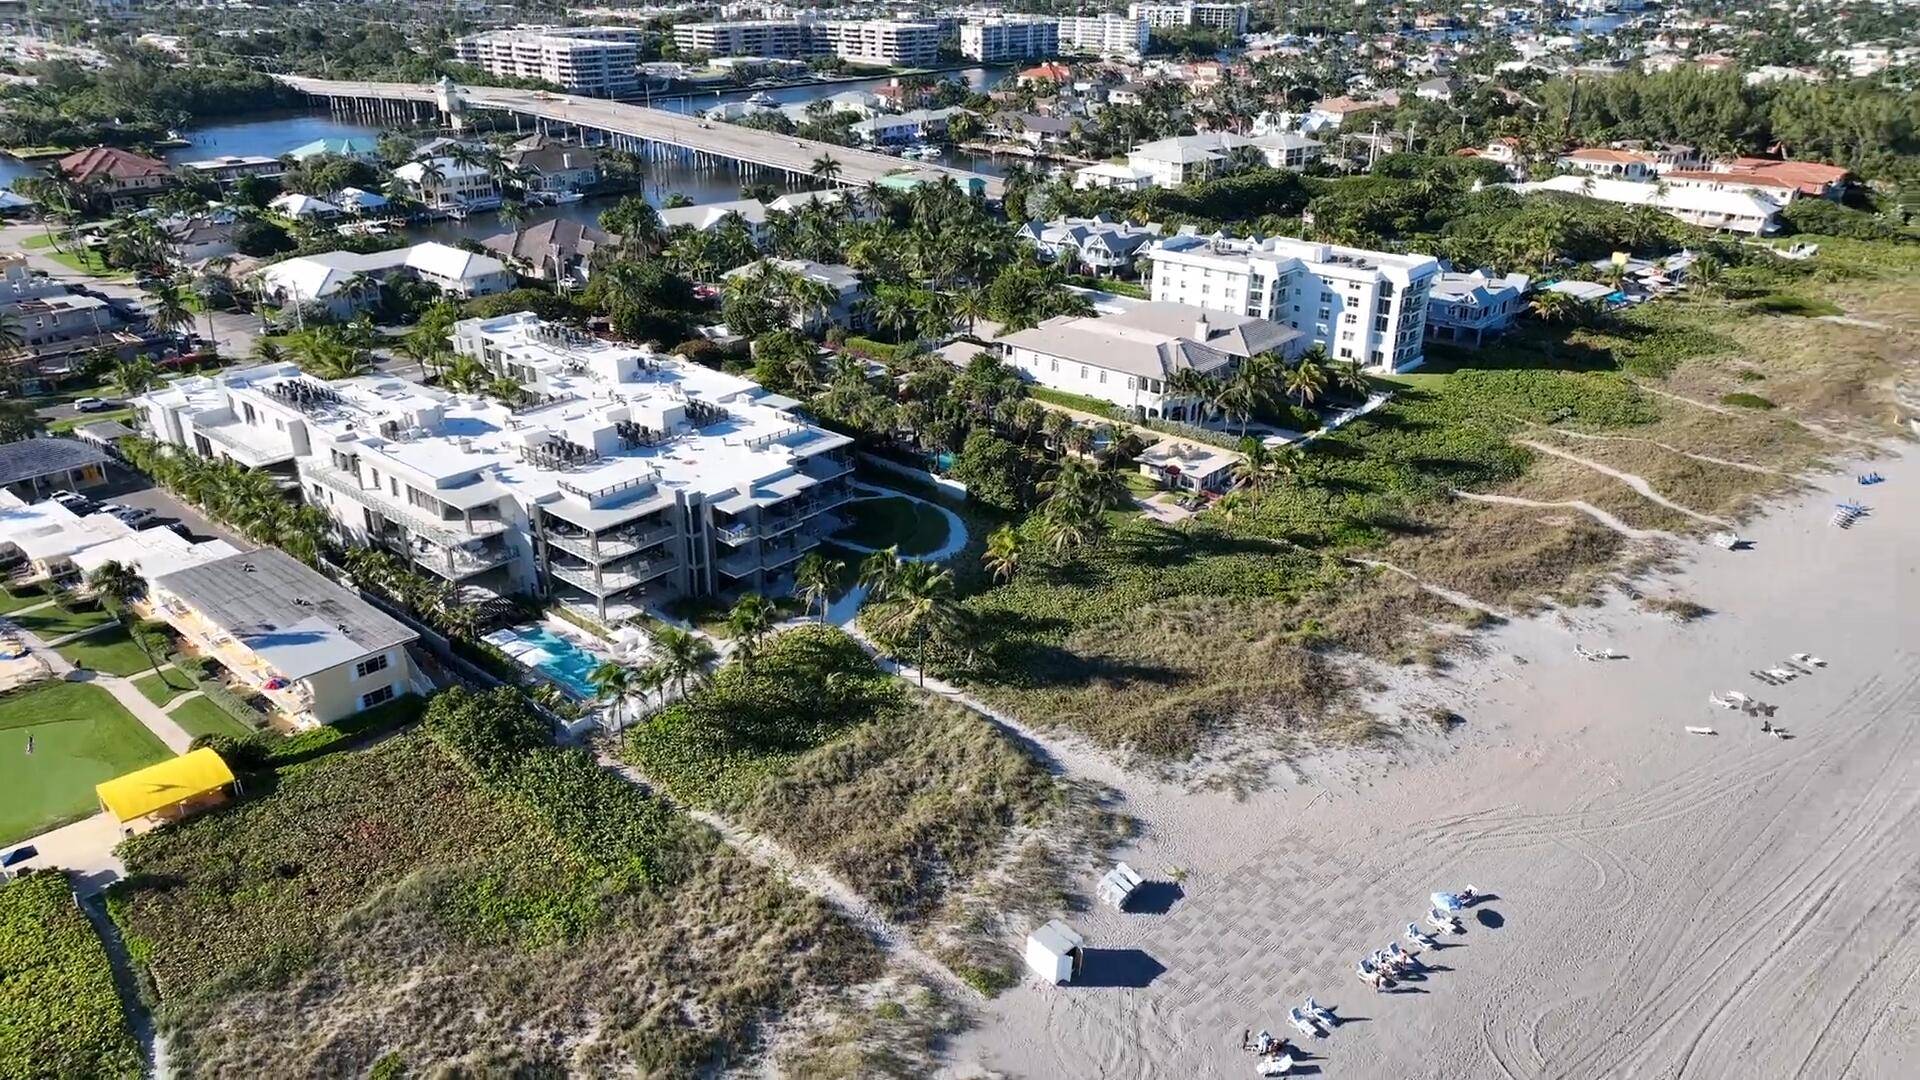 COMPLETED READY FOR IMMEDIATE OCCUPANCY WALK UP ENTRY WALK OUT ACCESS TO BEACH POOL Oceanfront luxury living on prime oceanfront in charming Delray Beach.